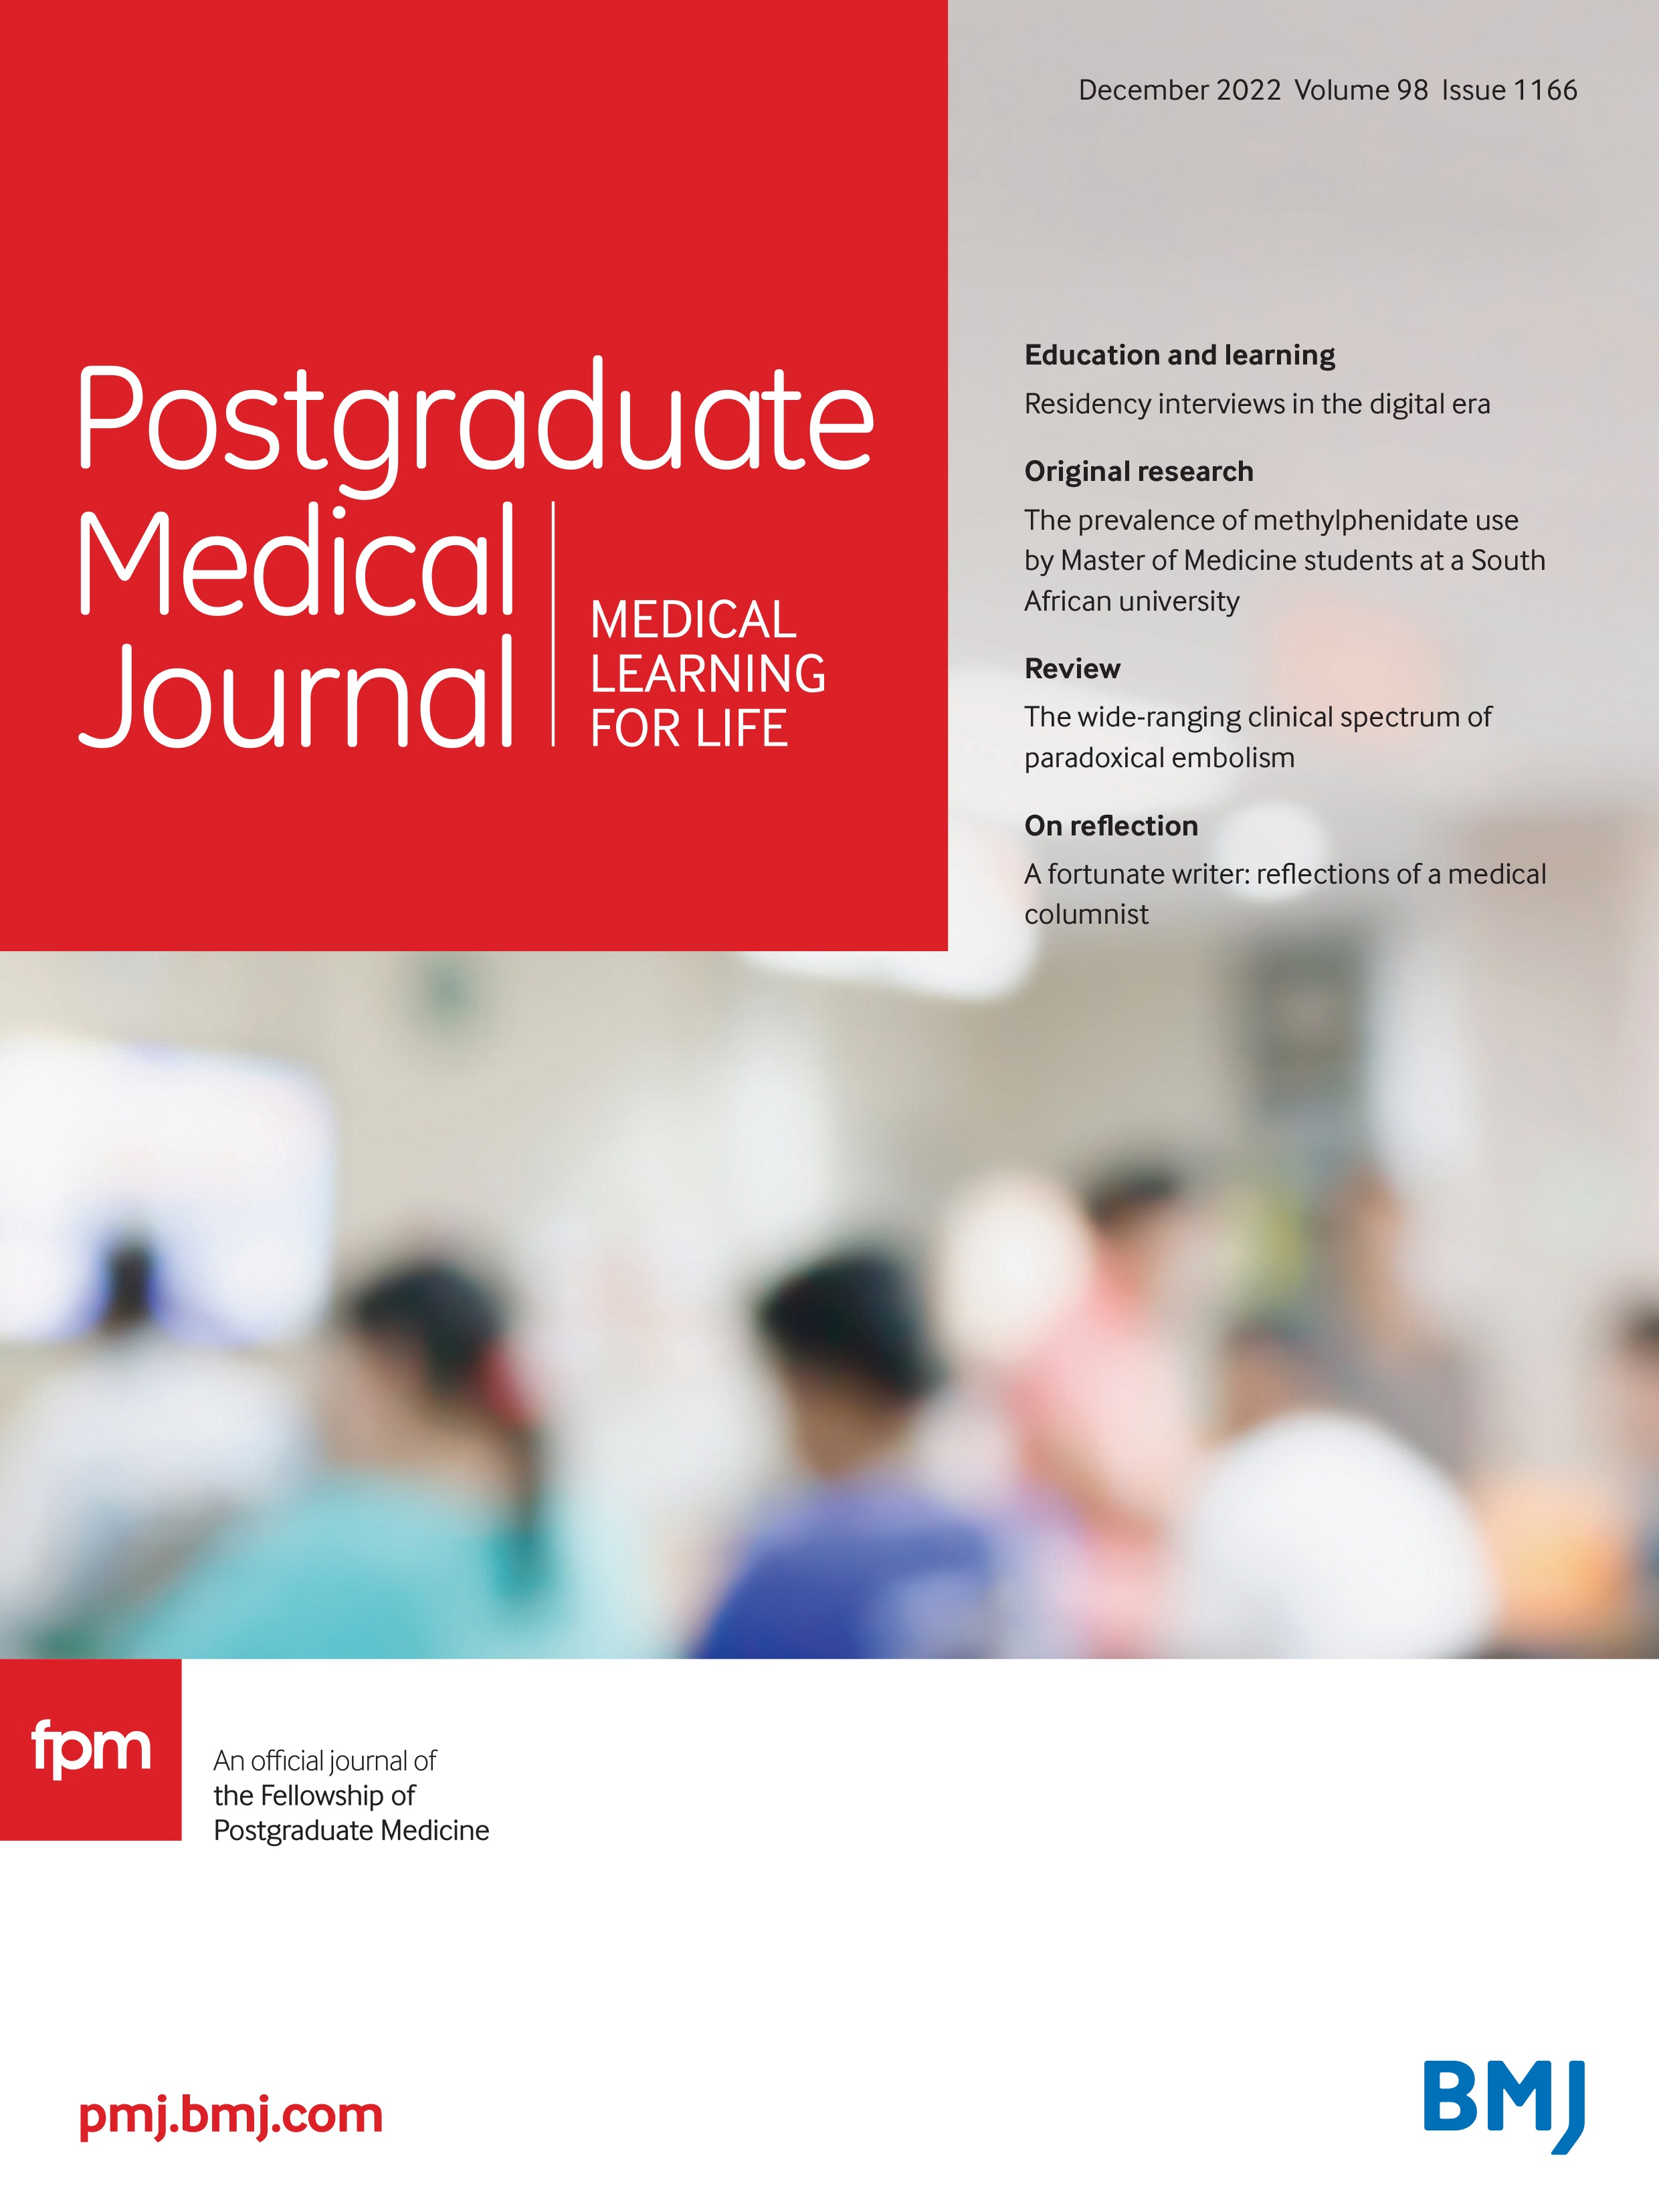 Influence of medical trainee sleep pattern (chronotype) on burn-out and satisfaction with work schedules: a multicentre observational study